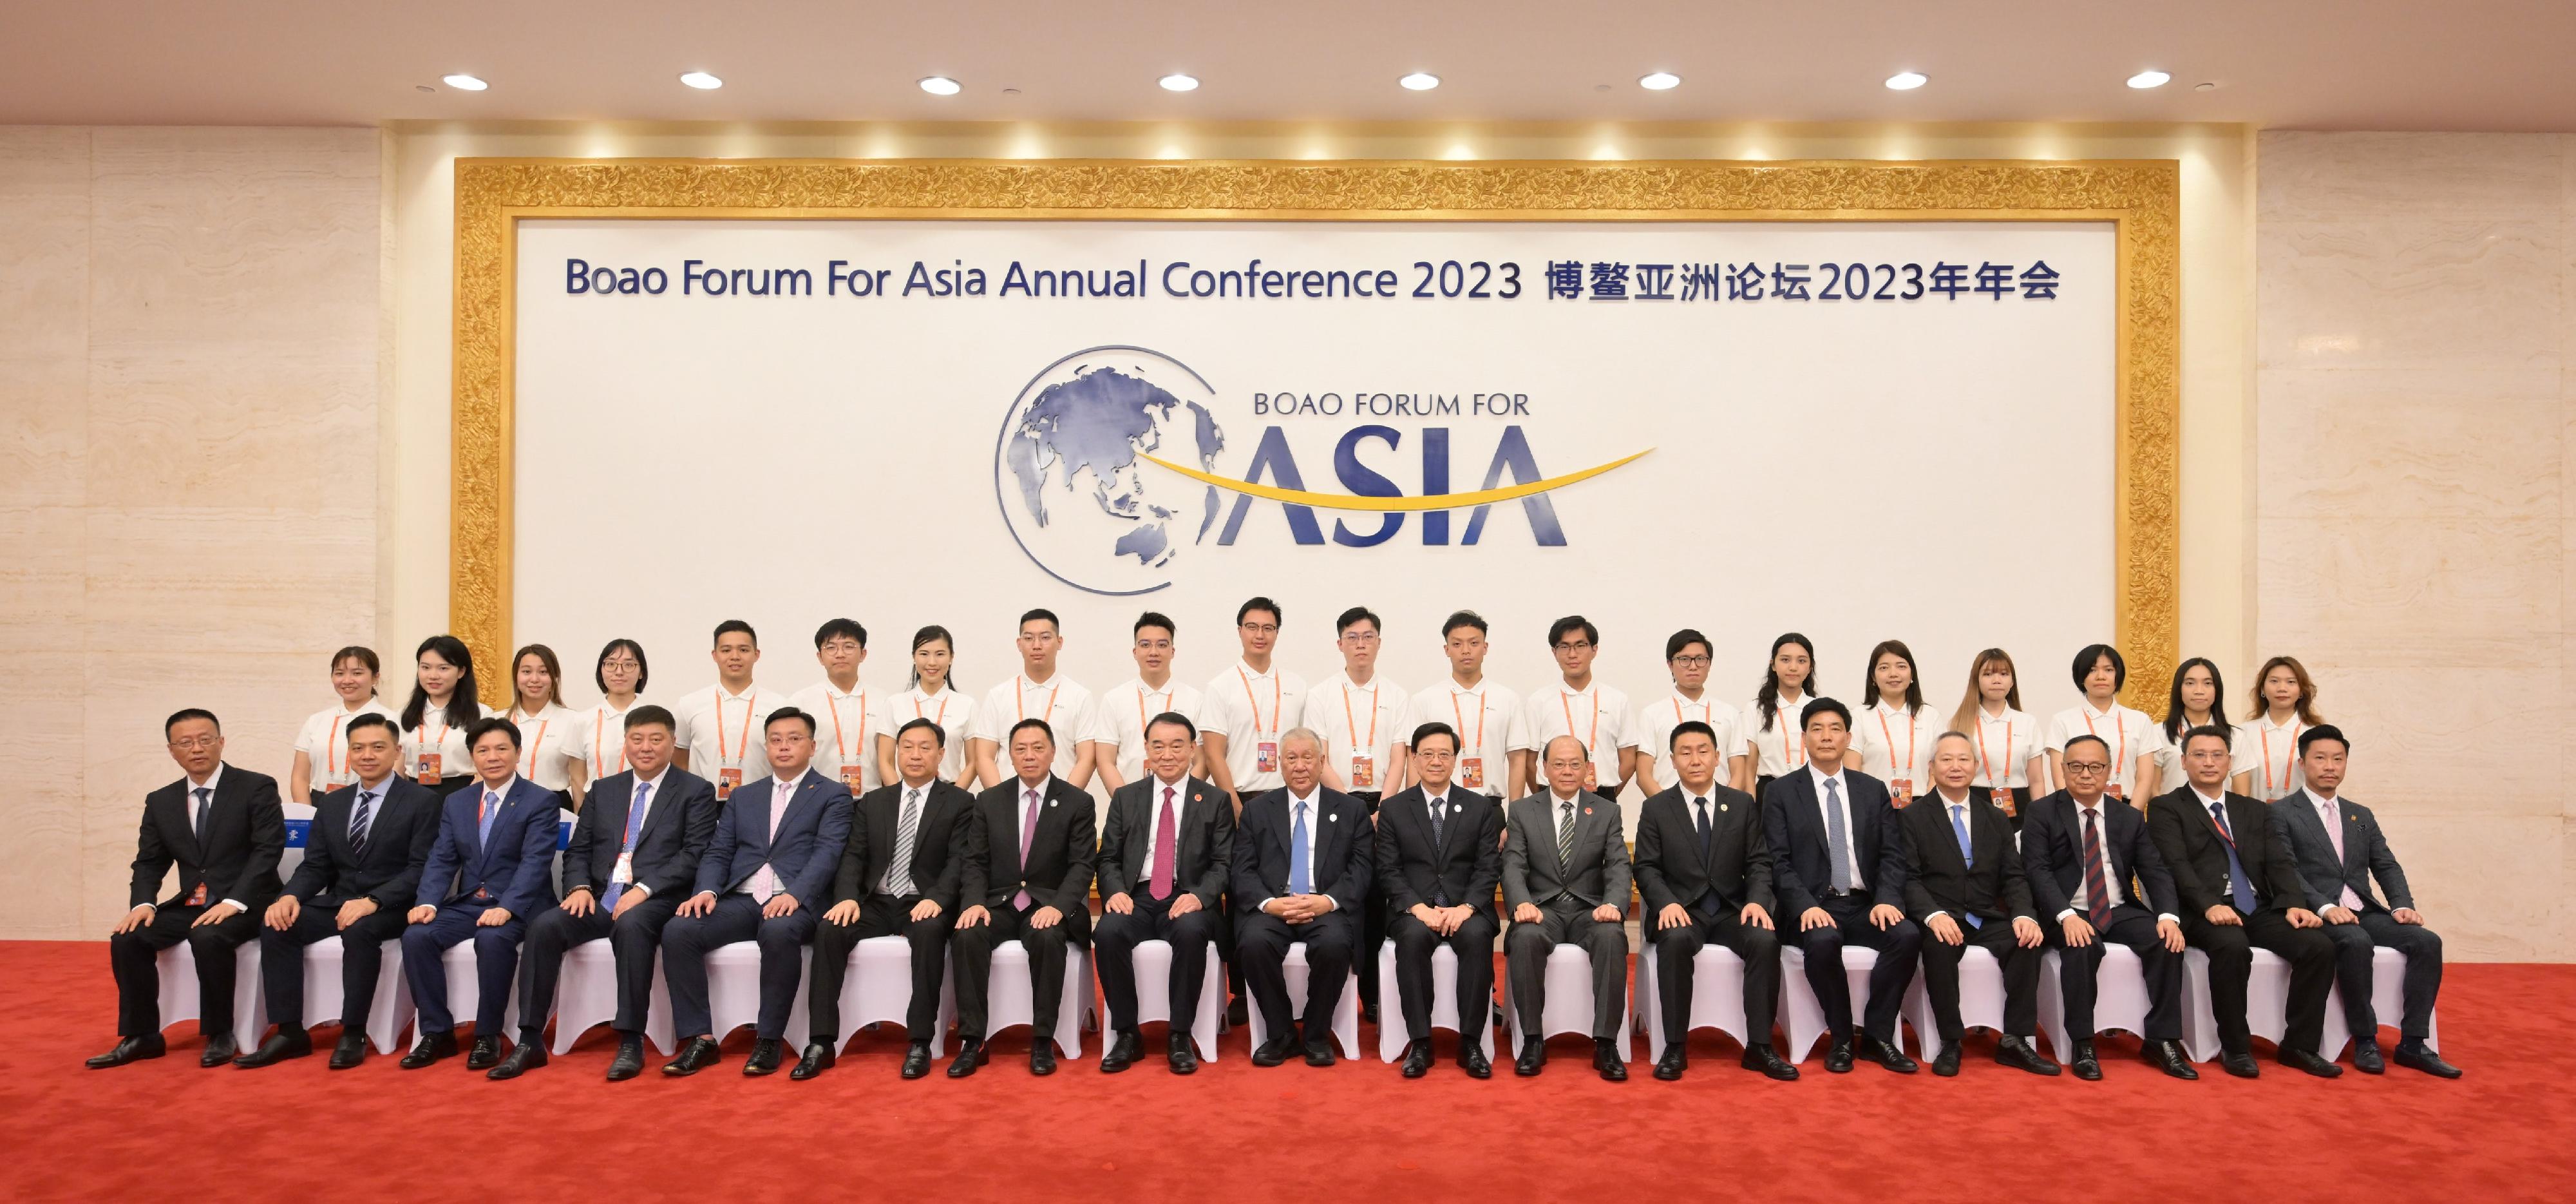 The Chief Executive, Mr John Lee, attended the certificate presentation ceremony for youth volunteers from Hong Kong and Macao at the Boao Forum for Asia Annual Conference 2023 in Hainan today (March 30). Photo shows Mr Lee (front row, eighth right); Vice-Chairman of the National Committee of the Chinese People's Political Consultative Conference Mr Edmund Ho (front row, ninth right); the Secretary-General of the Boao Forum for Asia, Mr Li Baodong (front row, eighth left); and other officiating guests and the youth volunteers from Hong Kong and Macao.